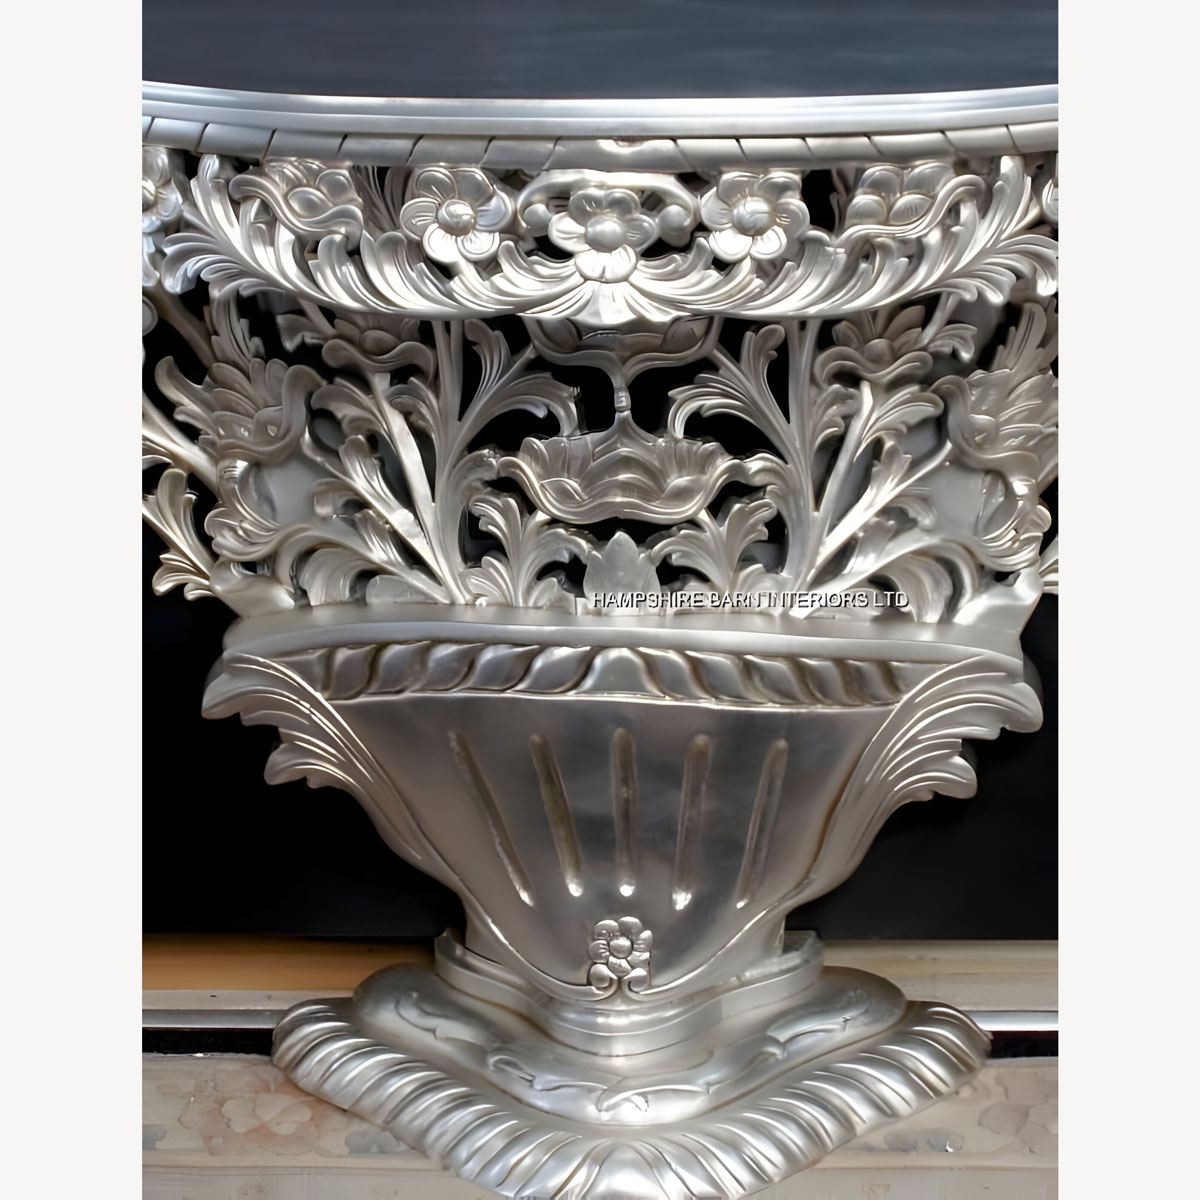 Bouquet De Fleur Silver Leaf Hall Console Table Flower Carved Mahogany Also In Gold 3 - Hampshire Barn Interiors - Bouquet De Fleur Silver Leaf Hall Console Table Flower Carved Mahogany ( Also In Gold) -